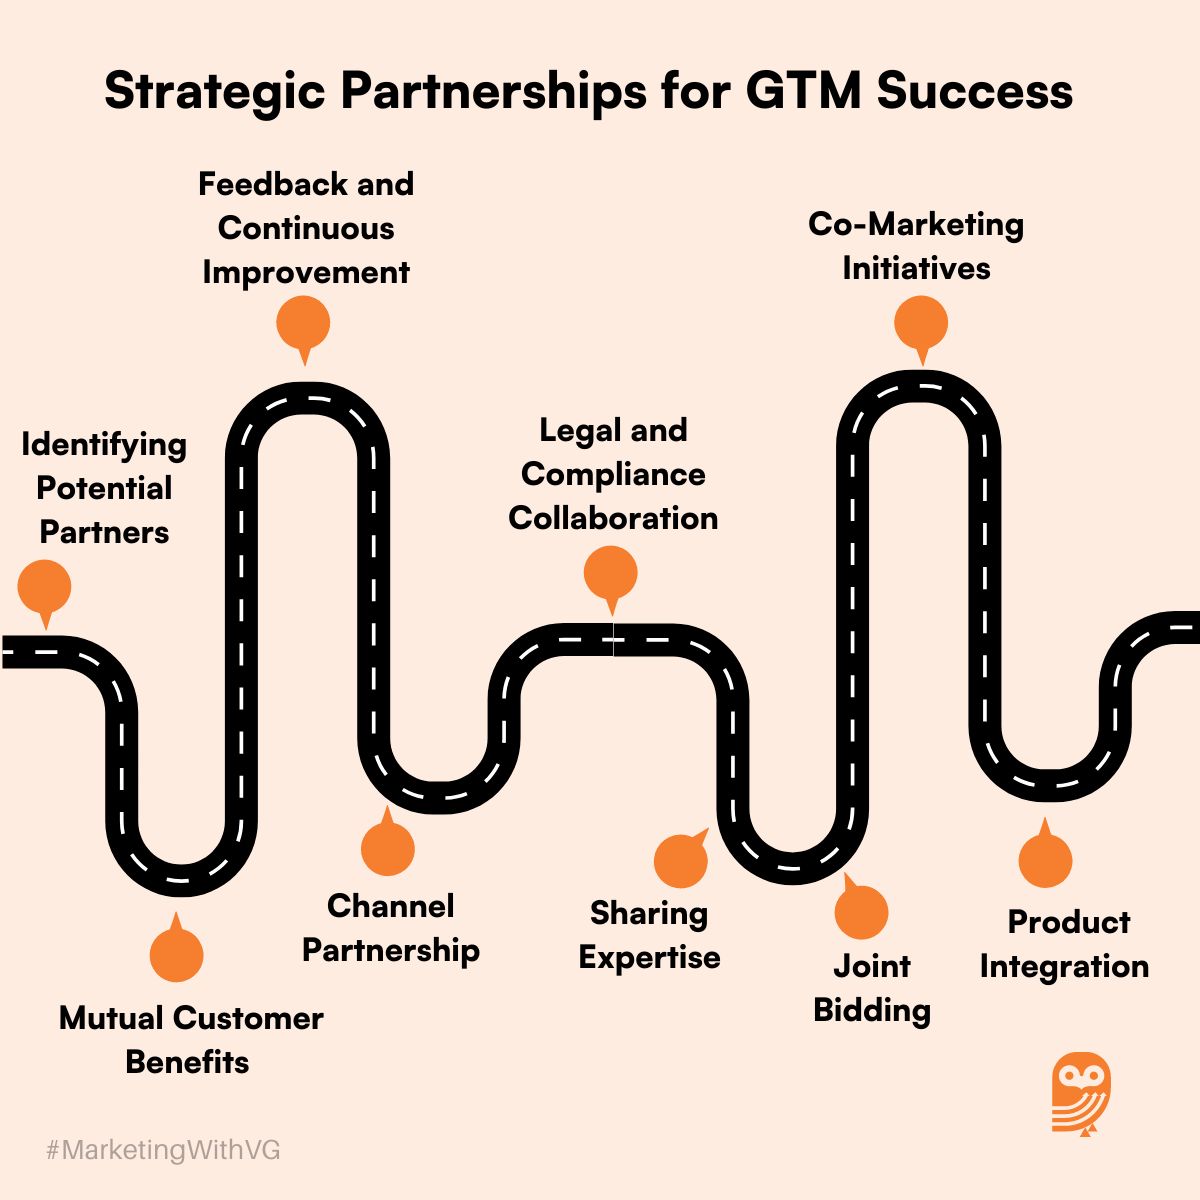 Role of Strategic partnerships for successful implementation of GTM